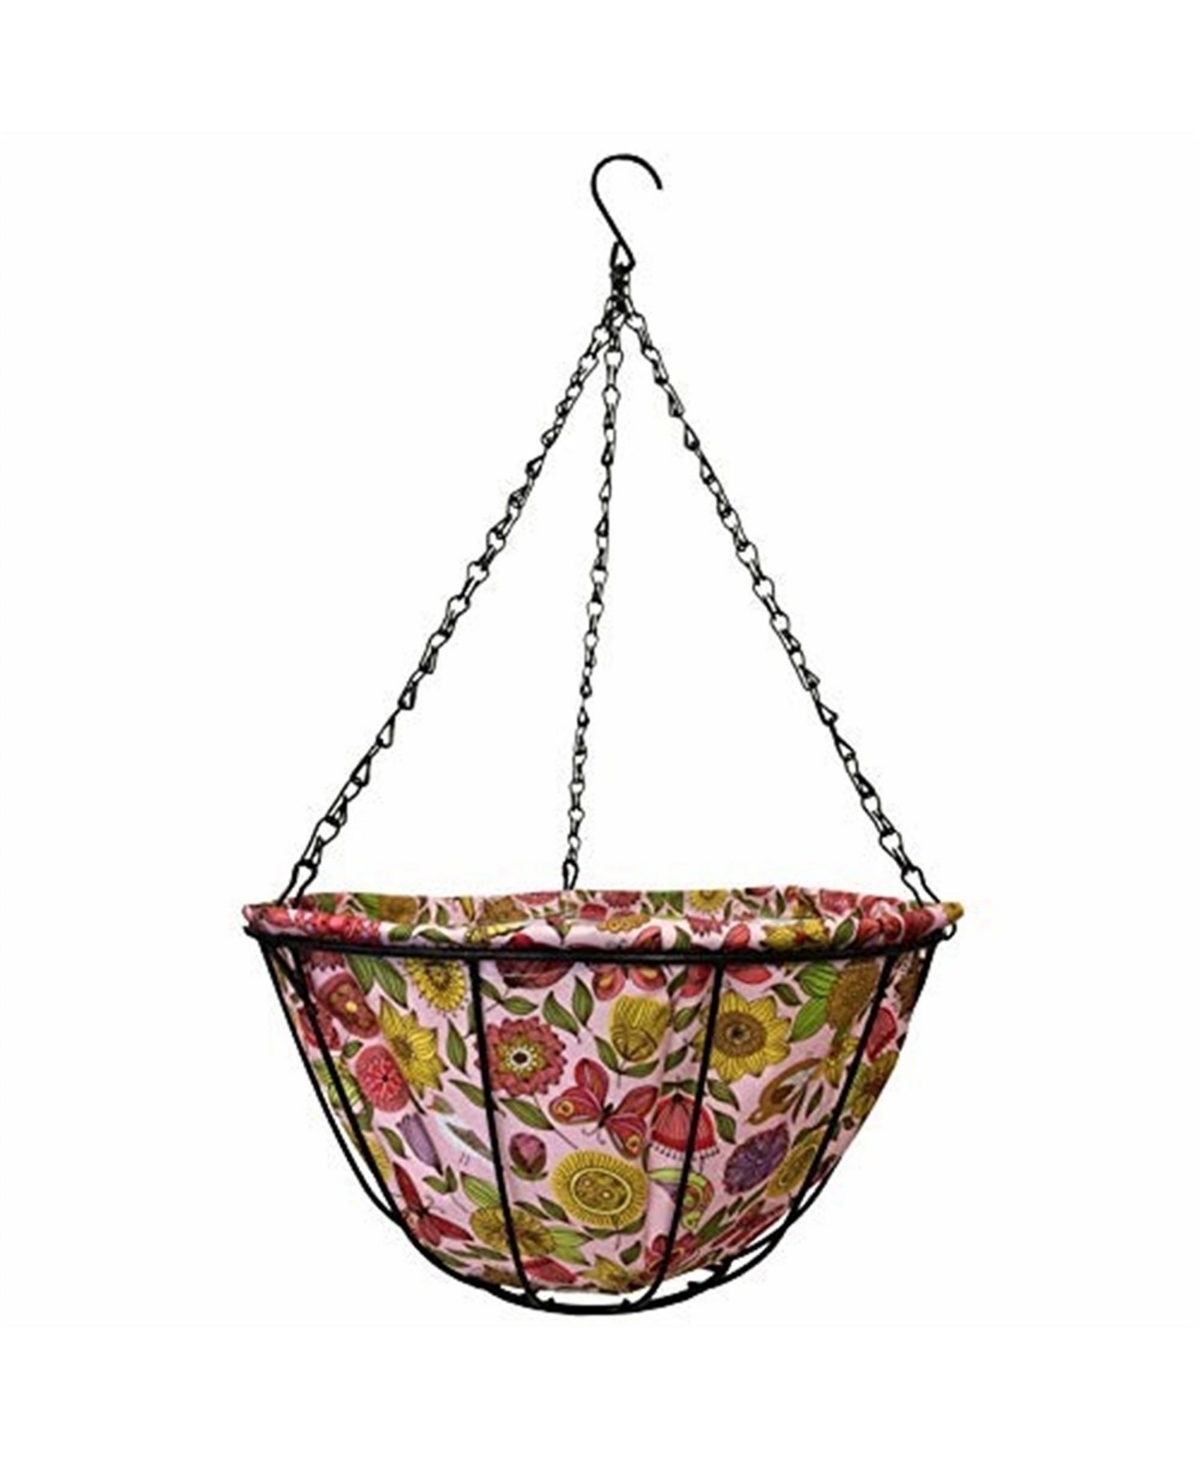 141424 Hanging Basket w Fabric Coco Liner, 14in - Multi